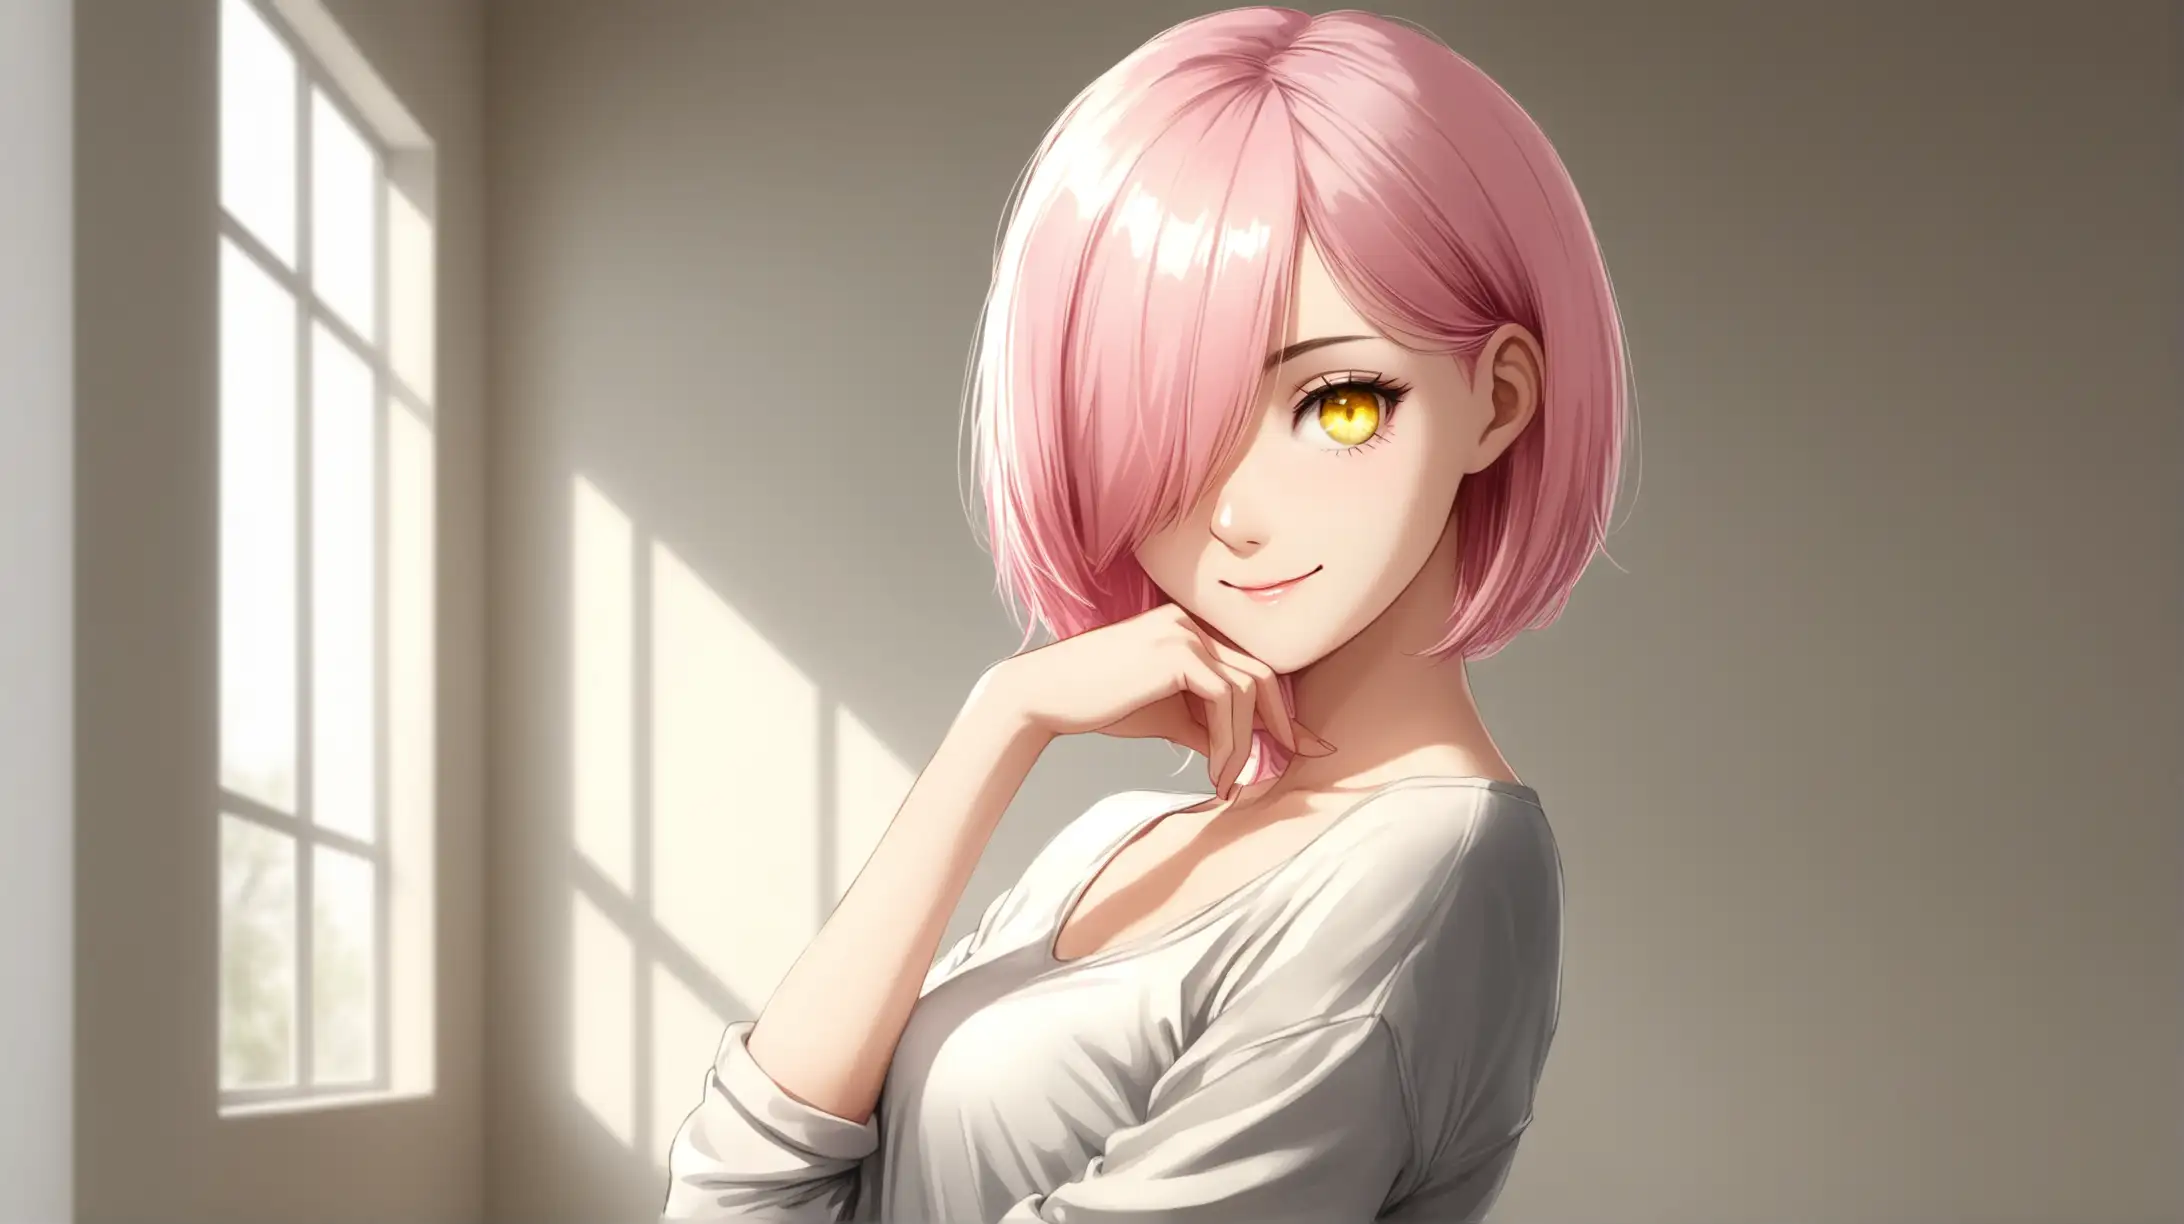 Draw a young woman, short pink hair covering one eye, yellow eyes, slender figure, wearing a casual outfit, seductive pose, indoors, natural lighting, smiling at the viewer